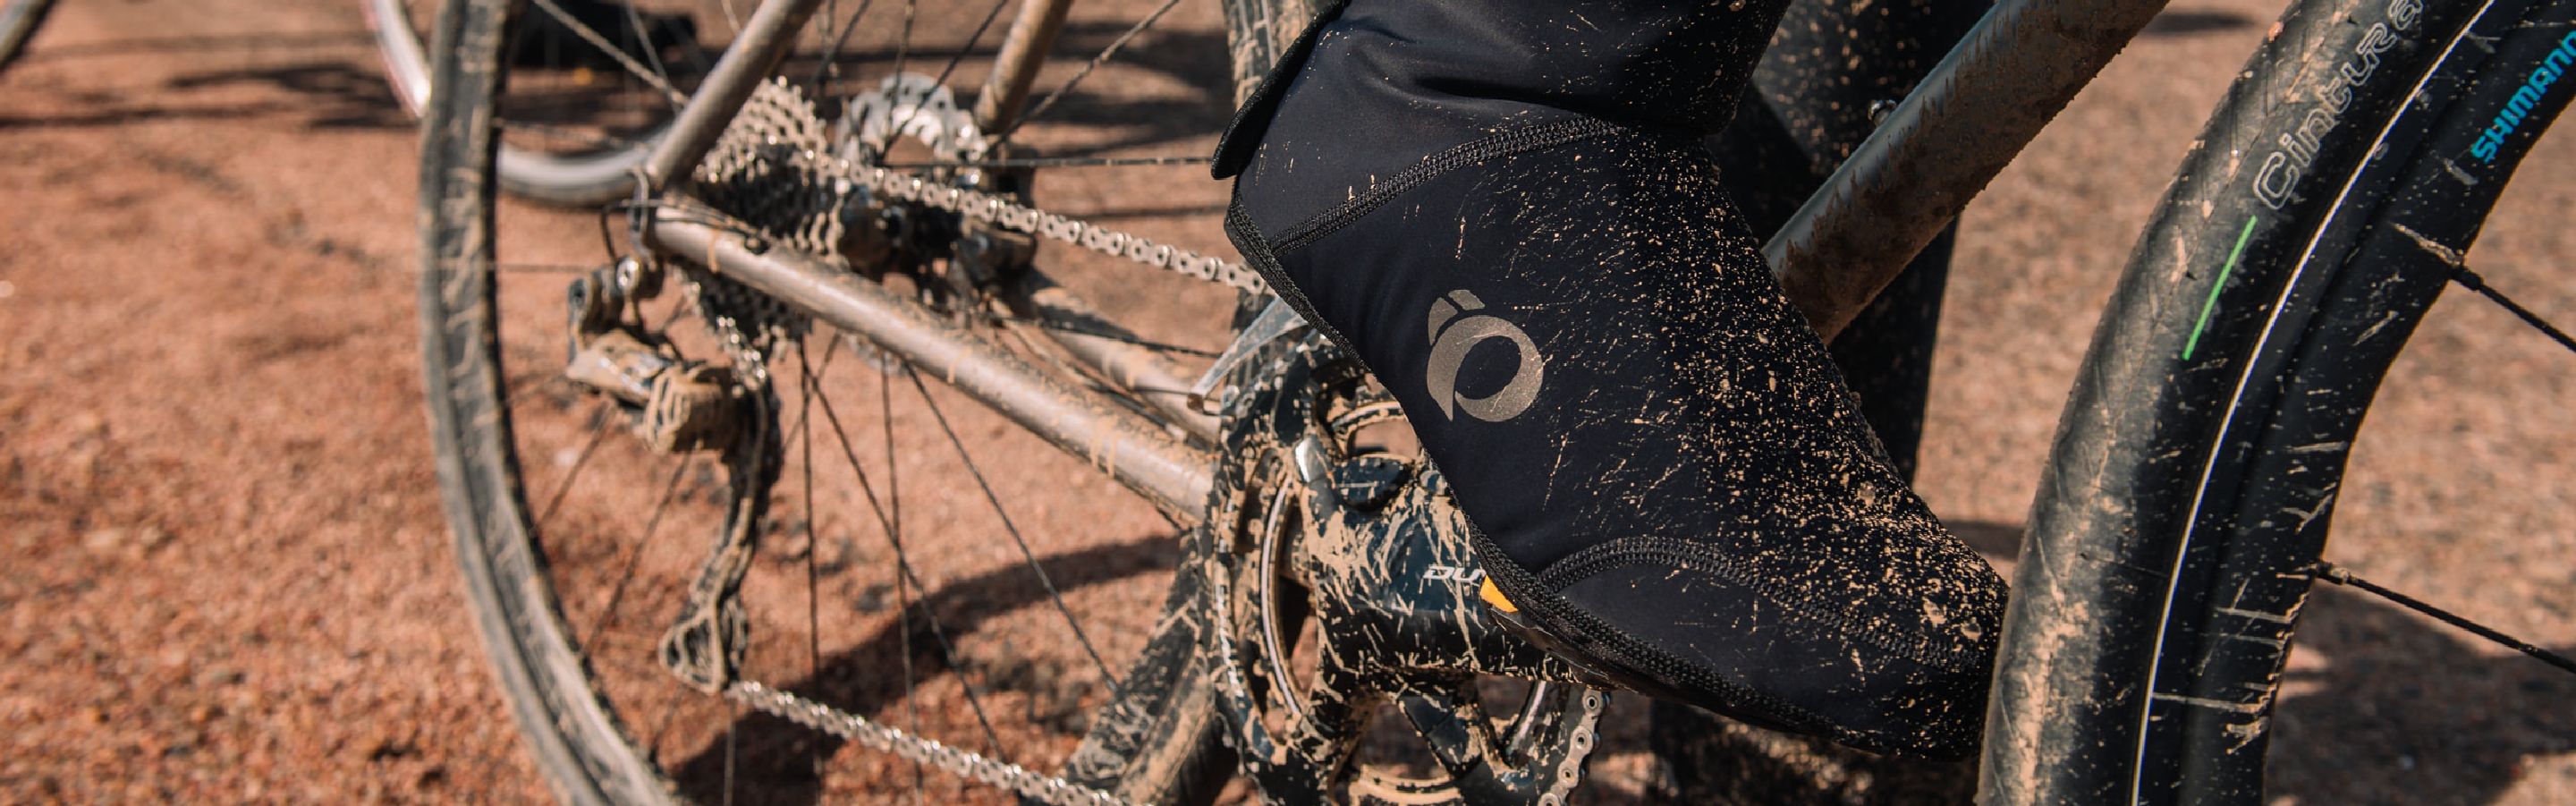 Cycling Shoe Covers in Muddy Conditions